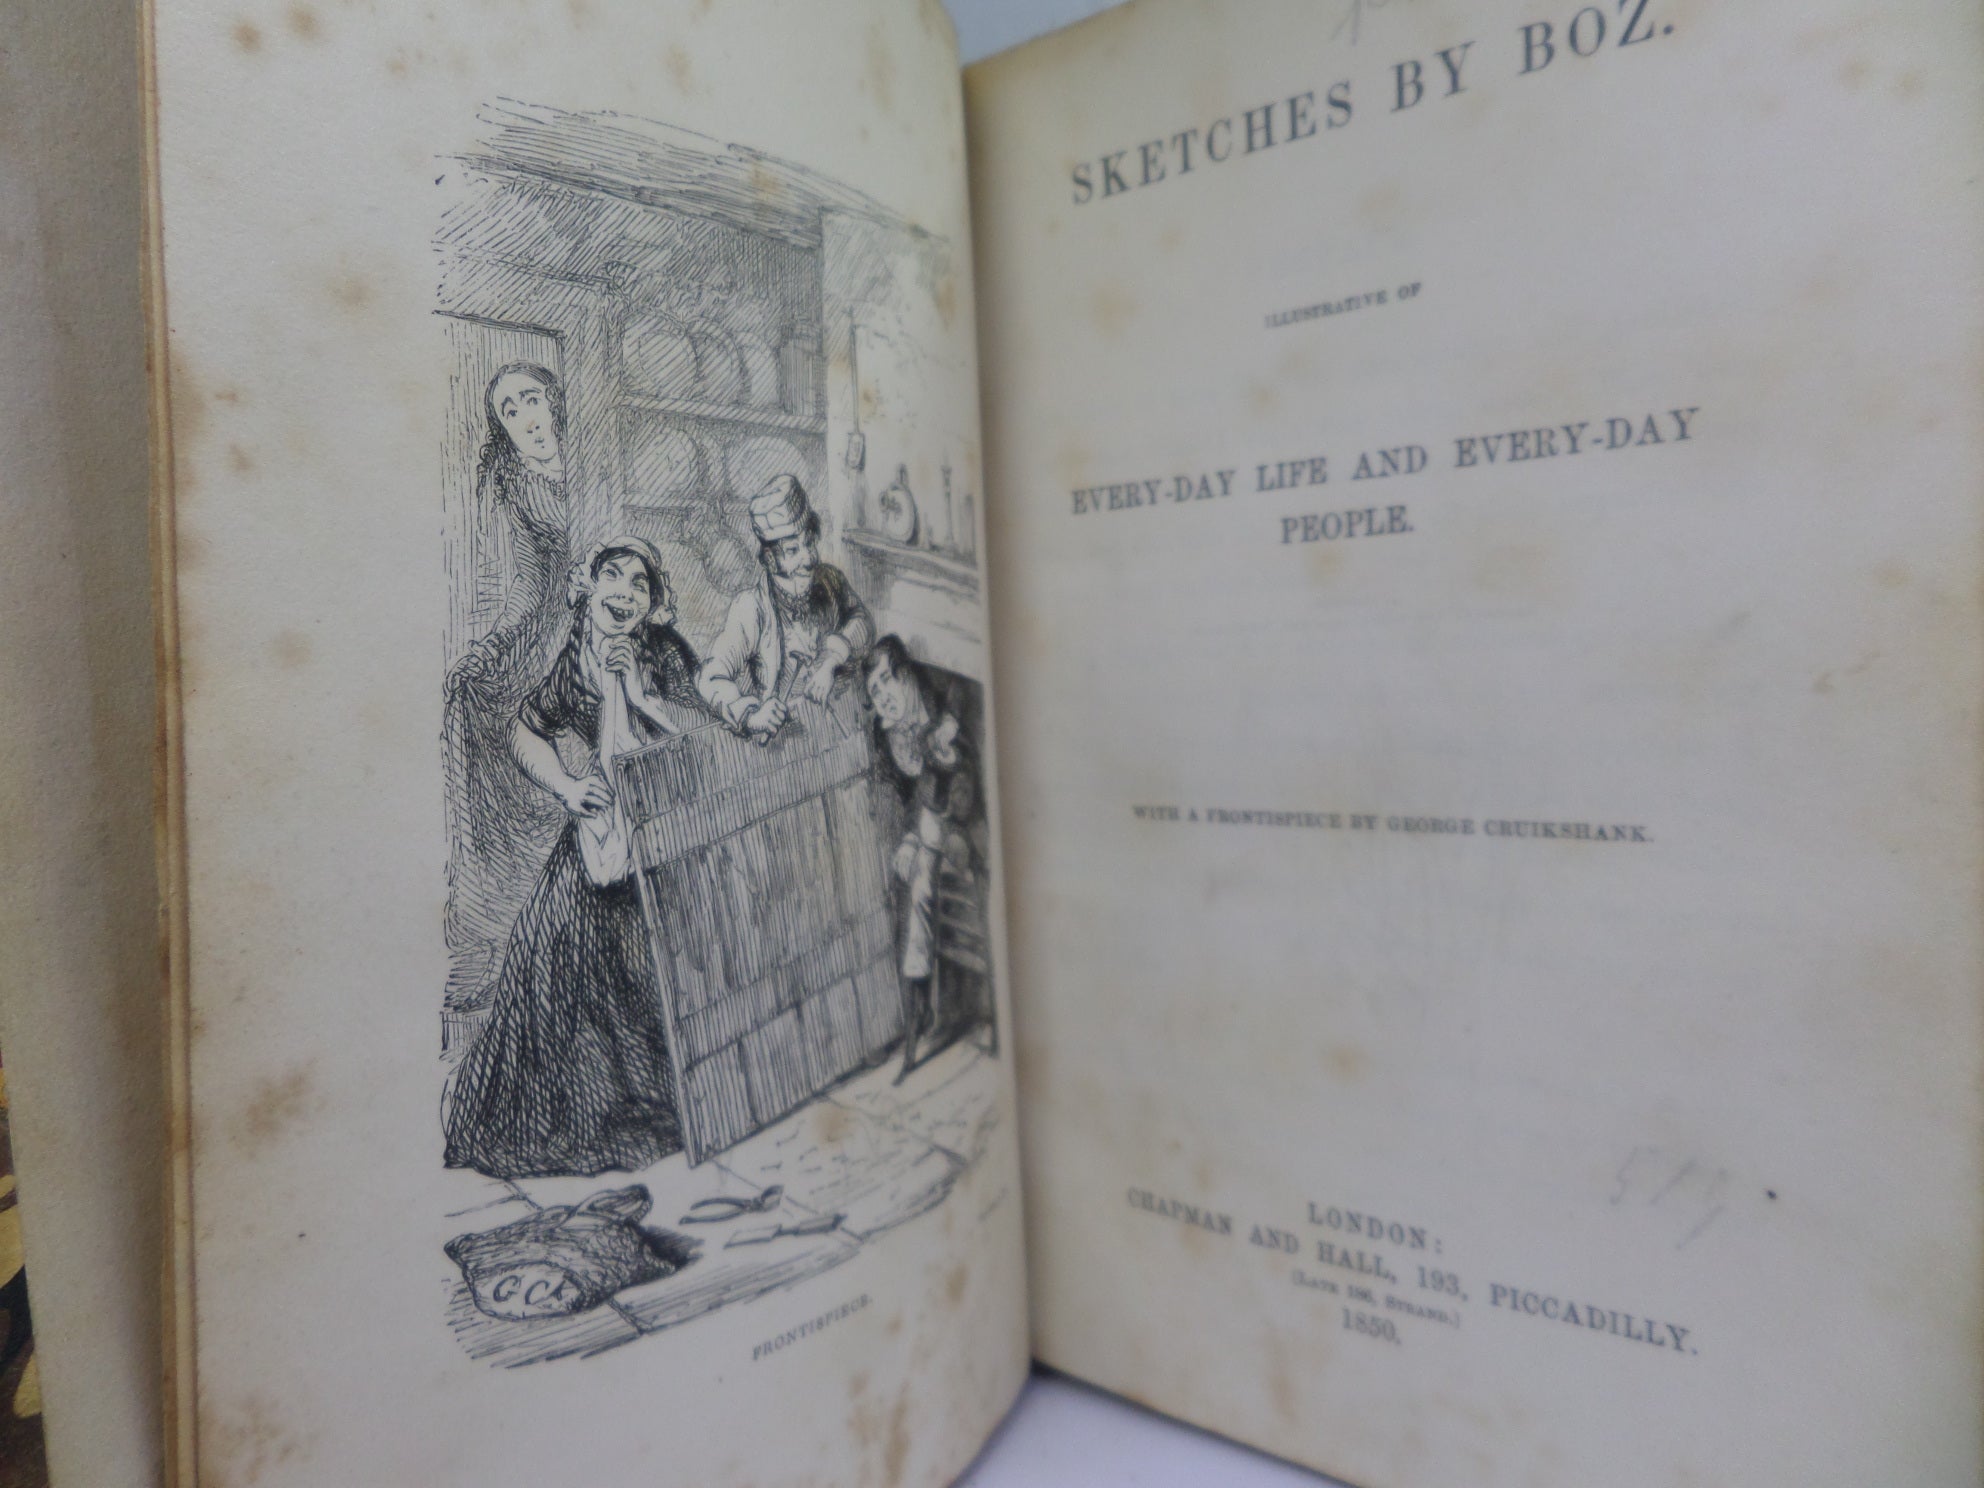 SKETCHES BY BOZ BY CHARLES DICKENS 1850 LEATHER BINDING